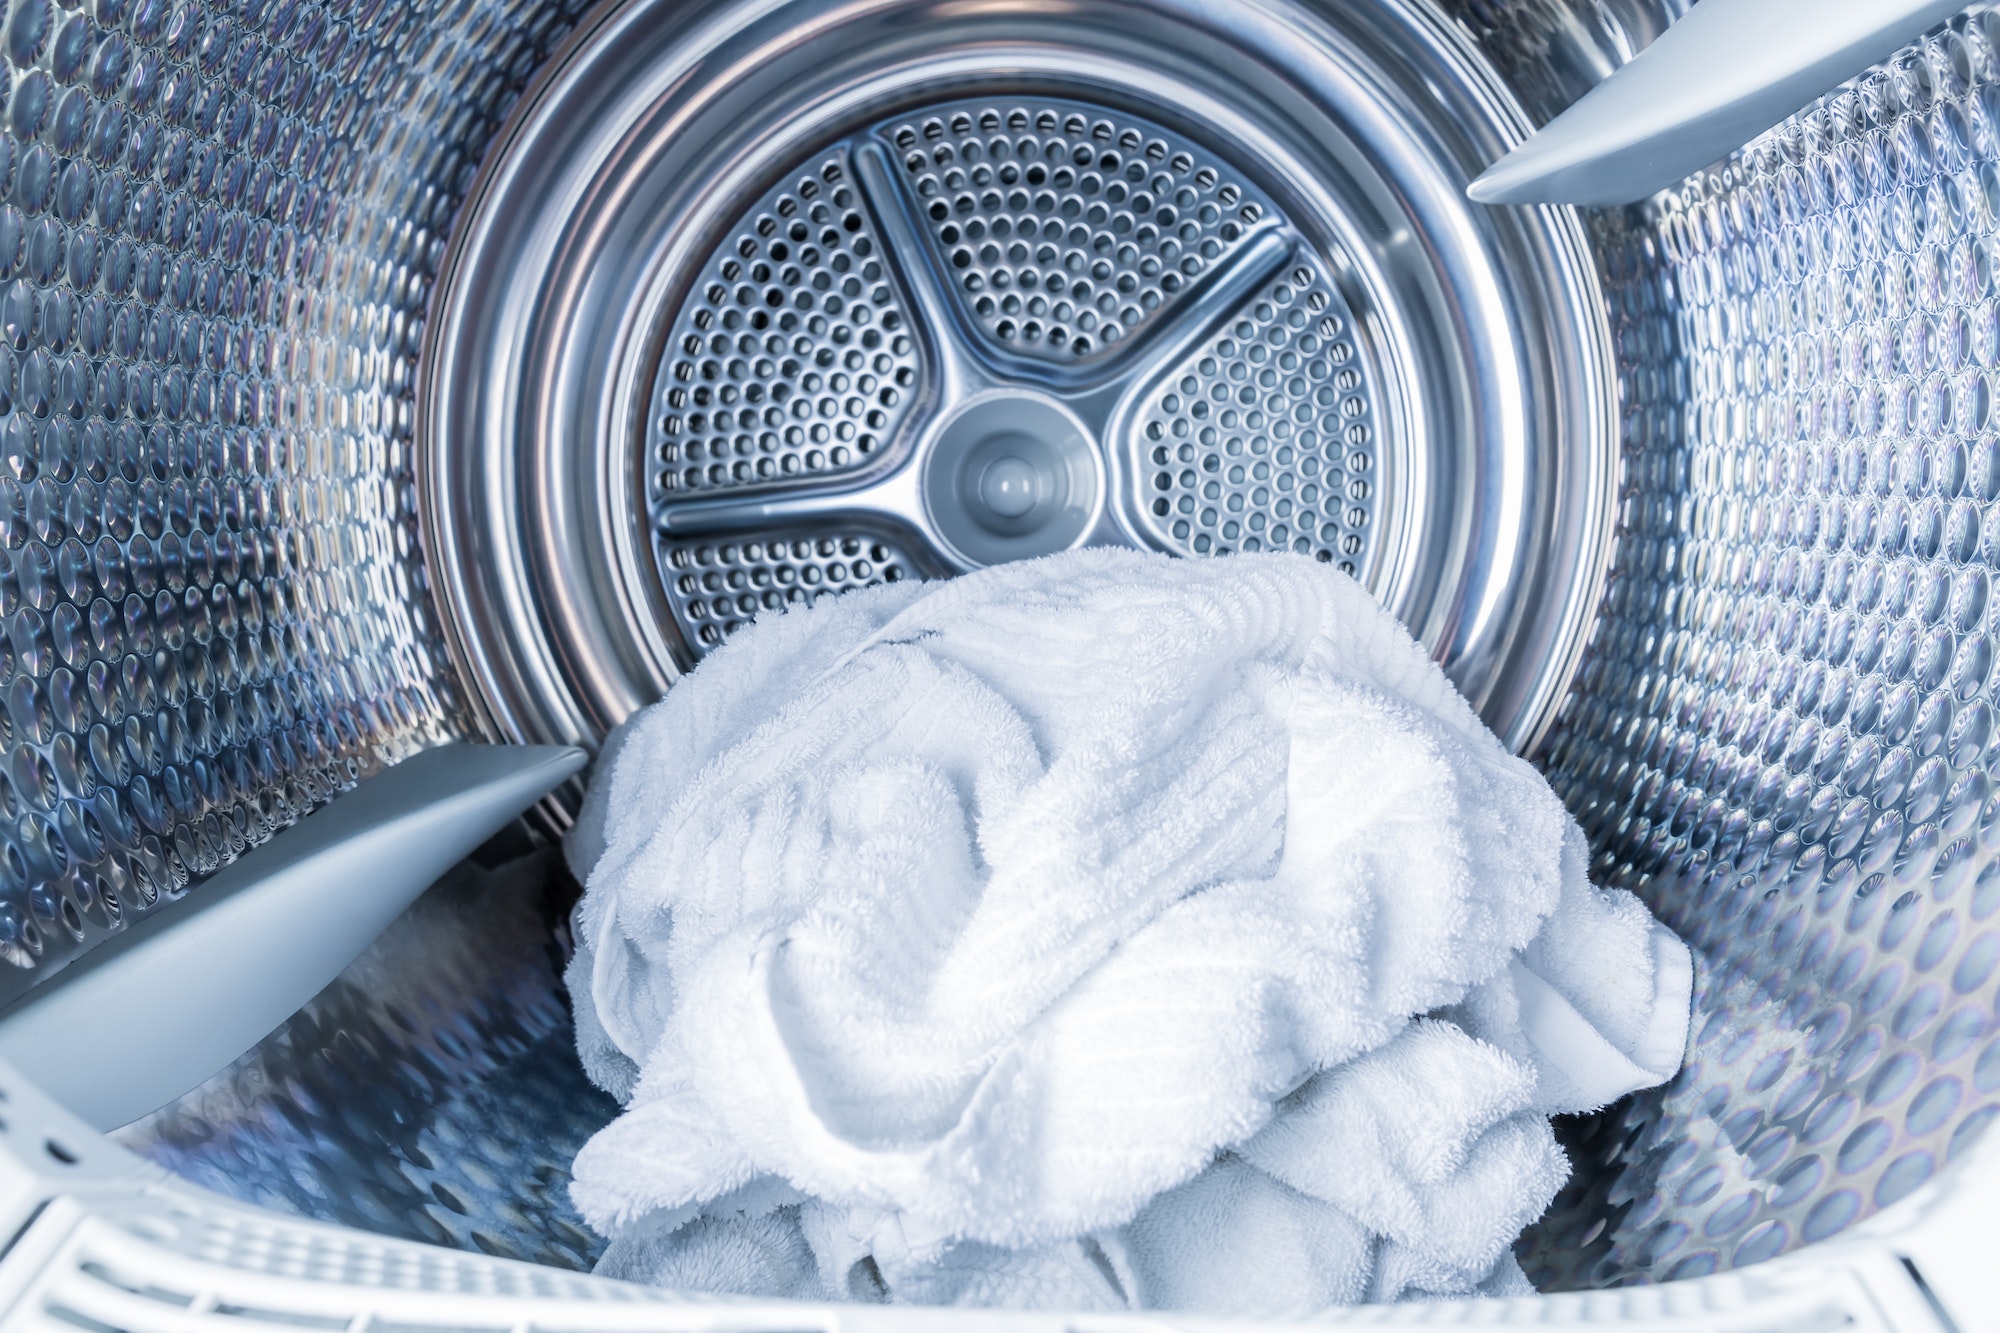 Troubleshooting Guide: How to Fix a Dryer That Smells Like Burning